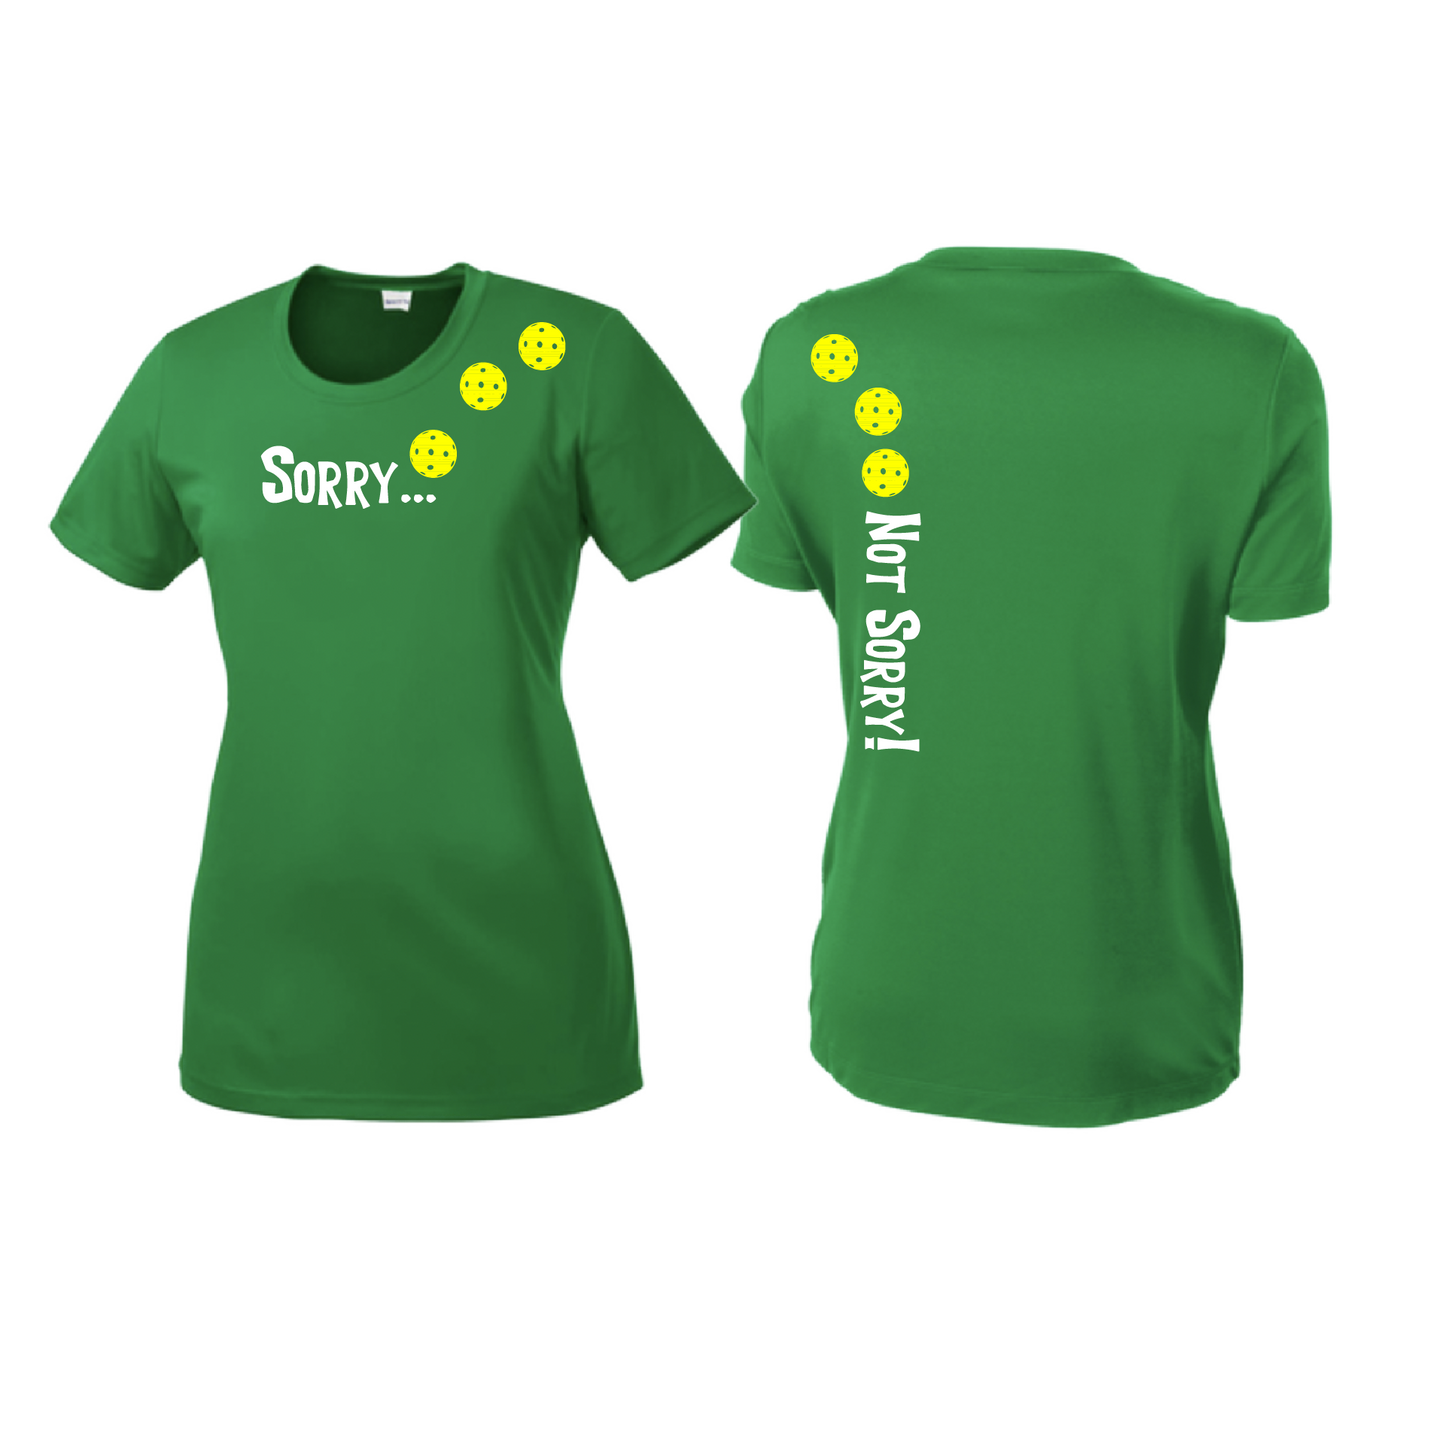 Pickleball Design: Sorry...Not Sorry with Customizable Ball Color - Choose: White, Yellow or Pink Women's Styles: Short-Sleeve Crew Neck Turn up the volume in this Women's shirt with its perfect mix of softness and attitude. Material is ultra-comfortable with moisture wicking properties and tri-blend softness. PosiCharge technology locks in color. Highly breathable and lightweight.